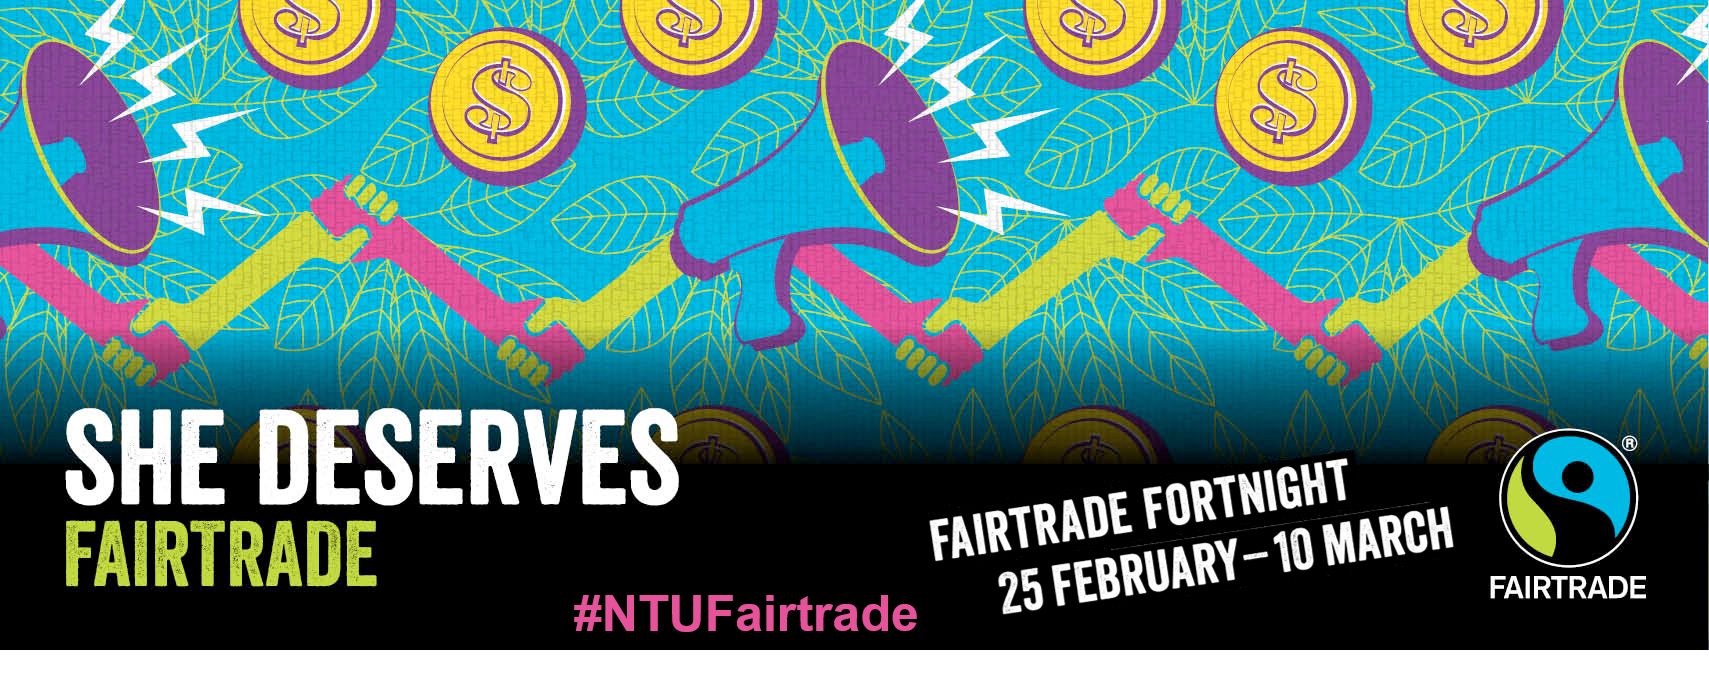 Image promoting Fairtrade Fortnight 2019